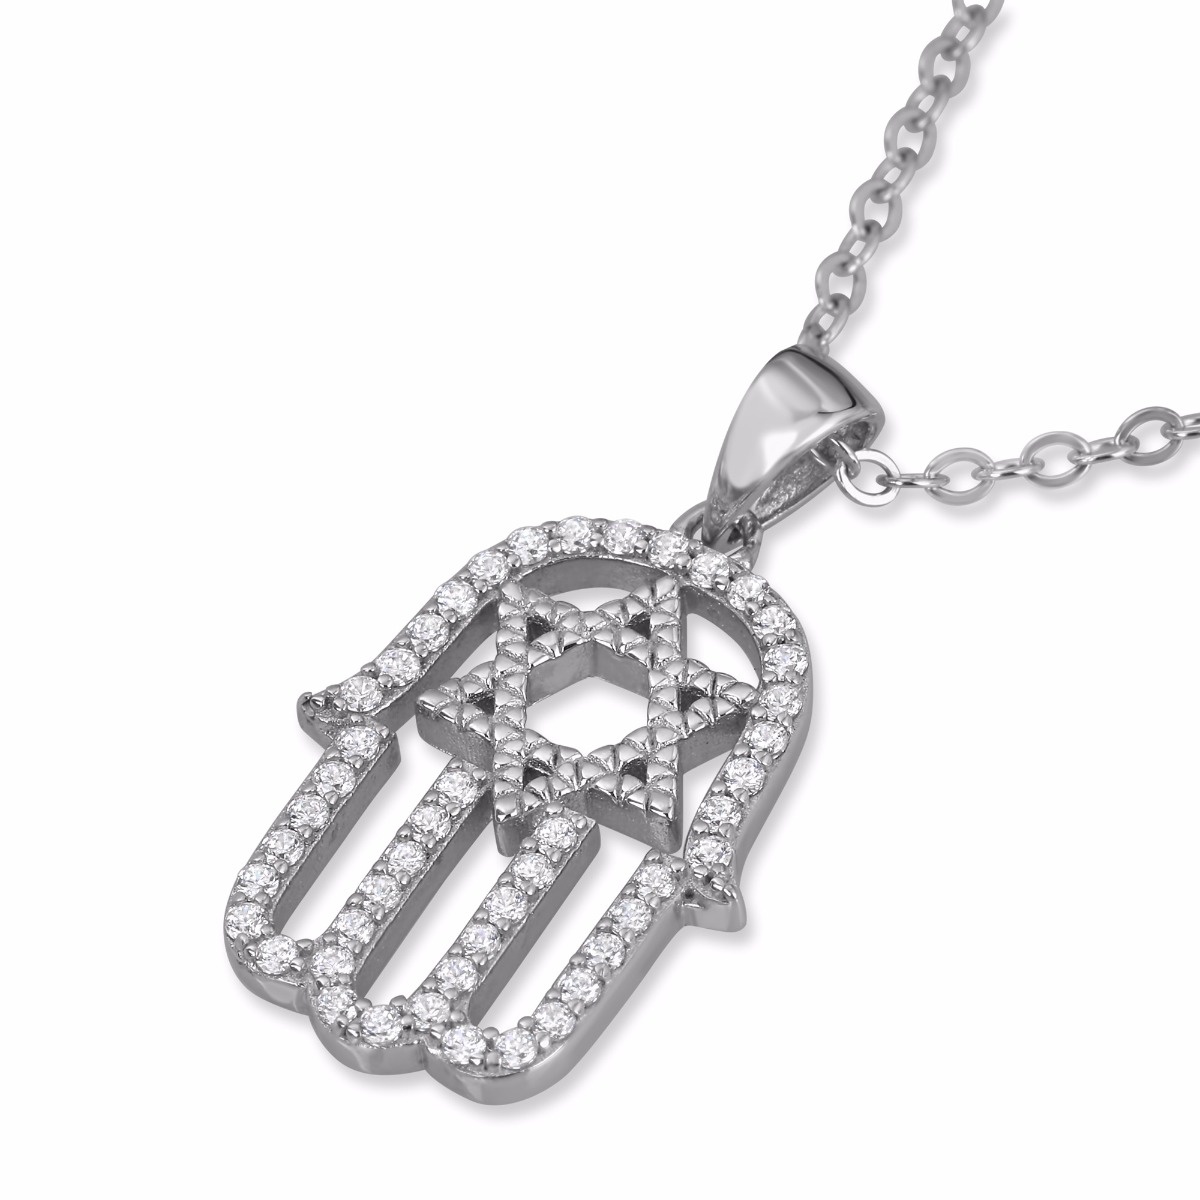 Silver and Zirconia Hamsa Necklace with Star of David - 1